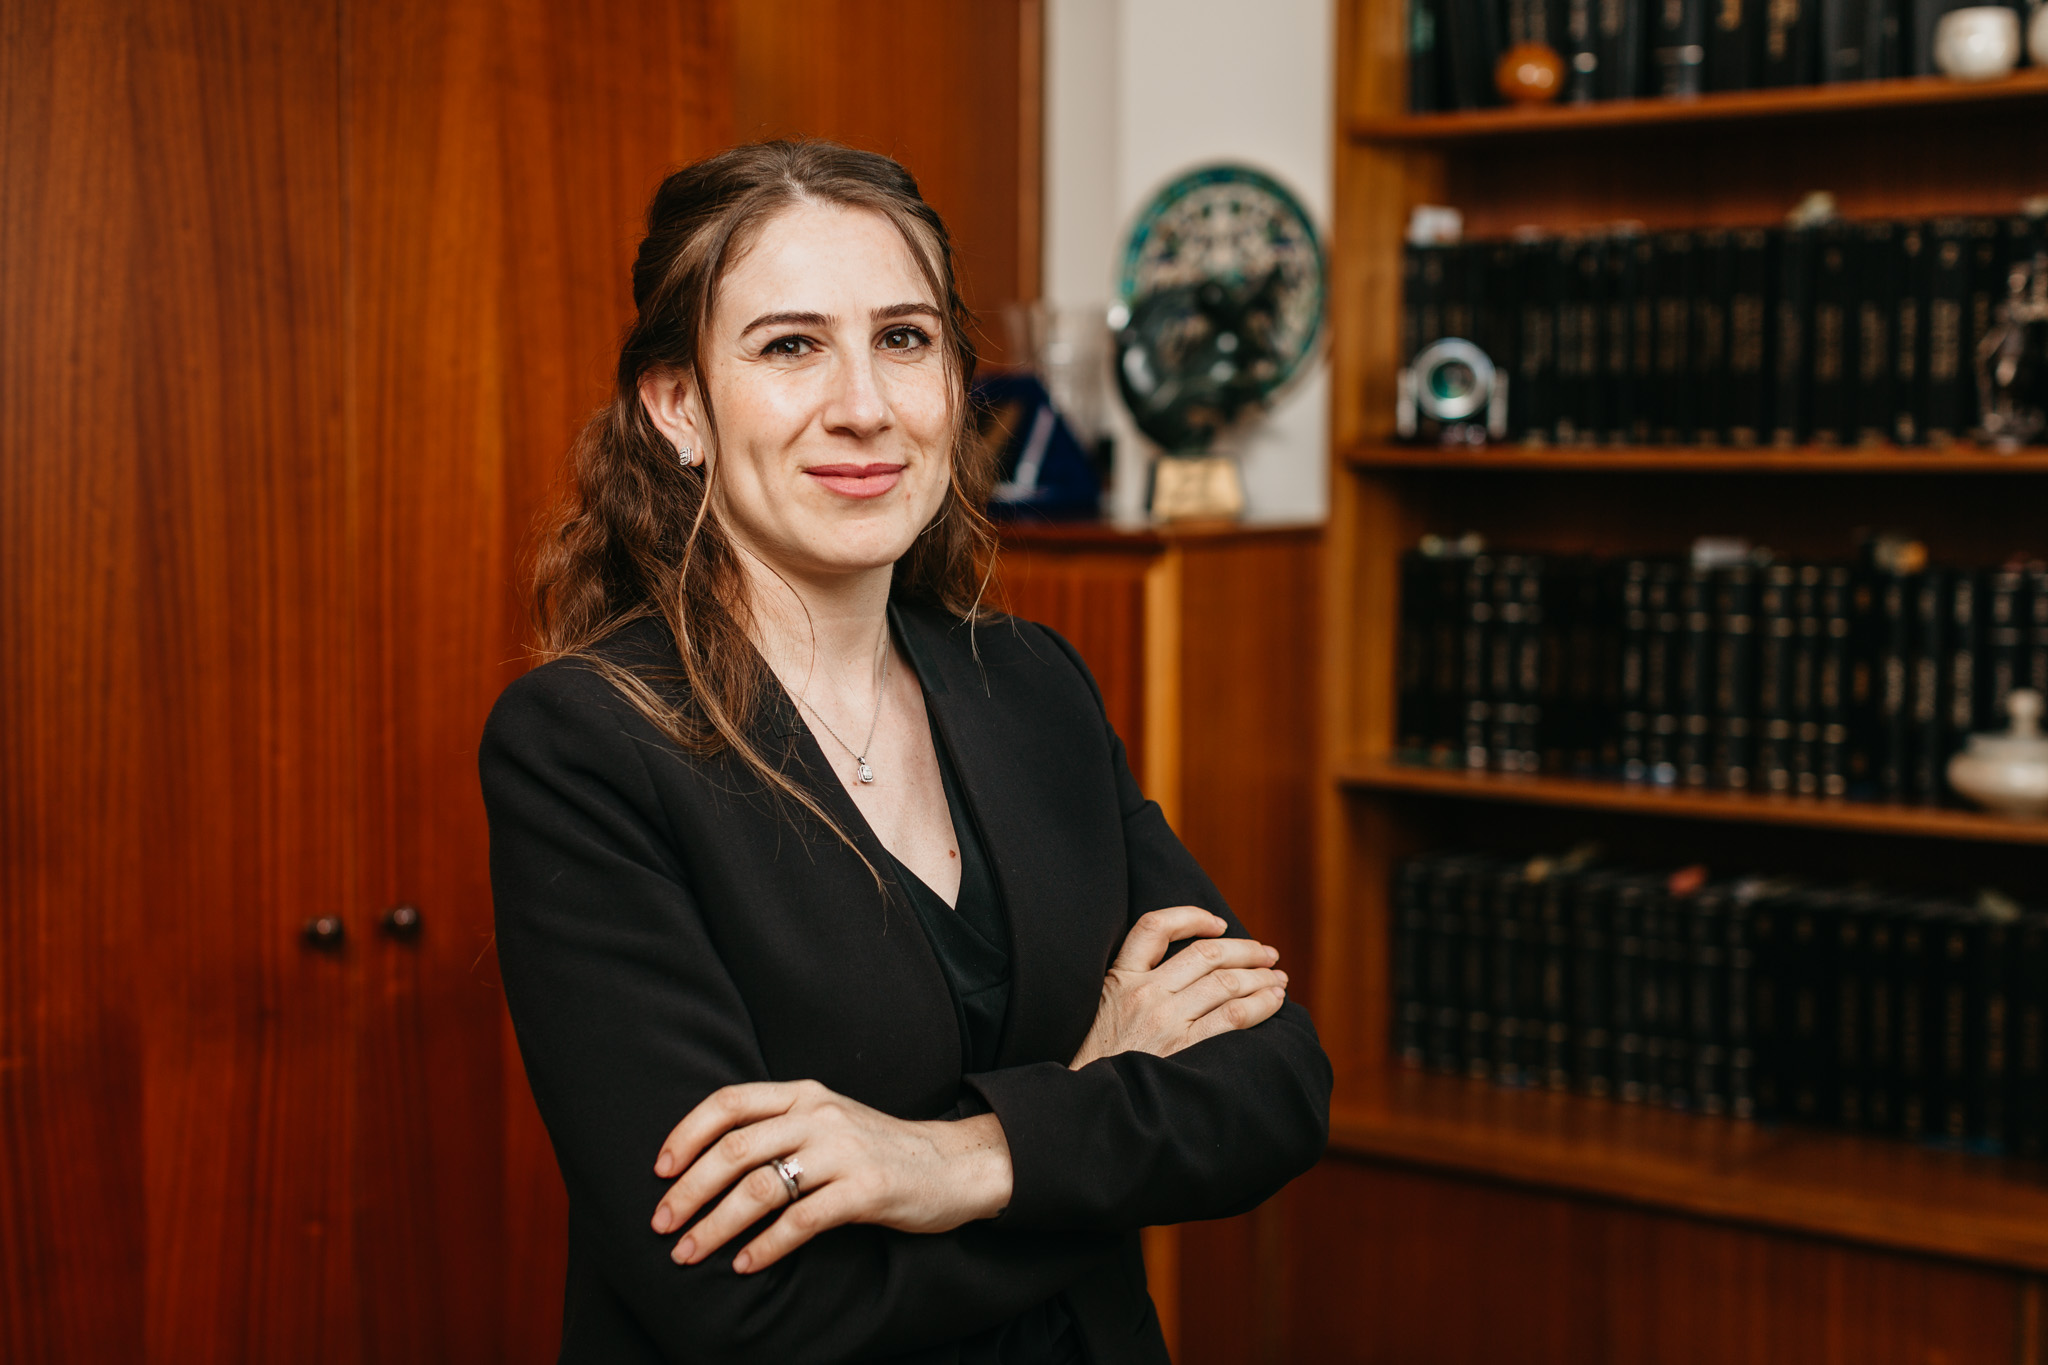 Lale Yiğit is an advocate in Northern Cyprus. Practice area - civil and criminal procedure